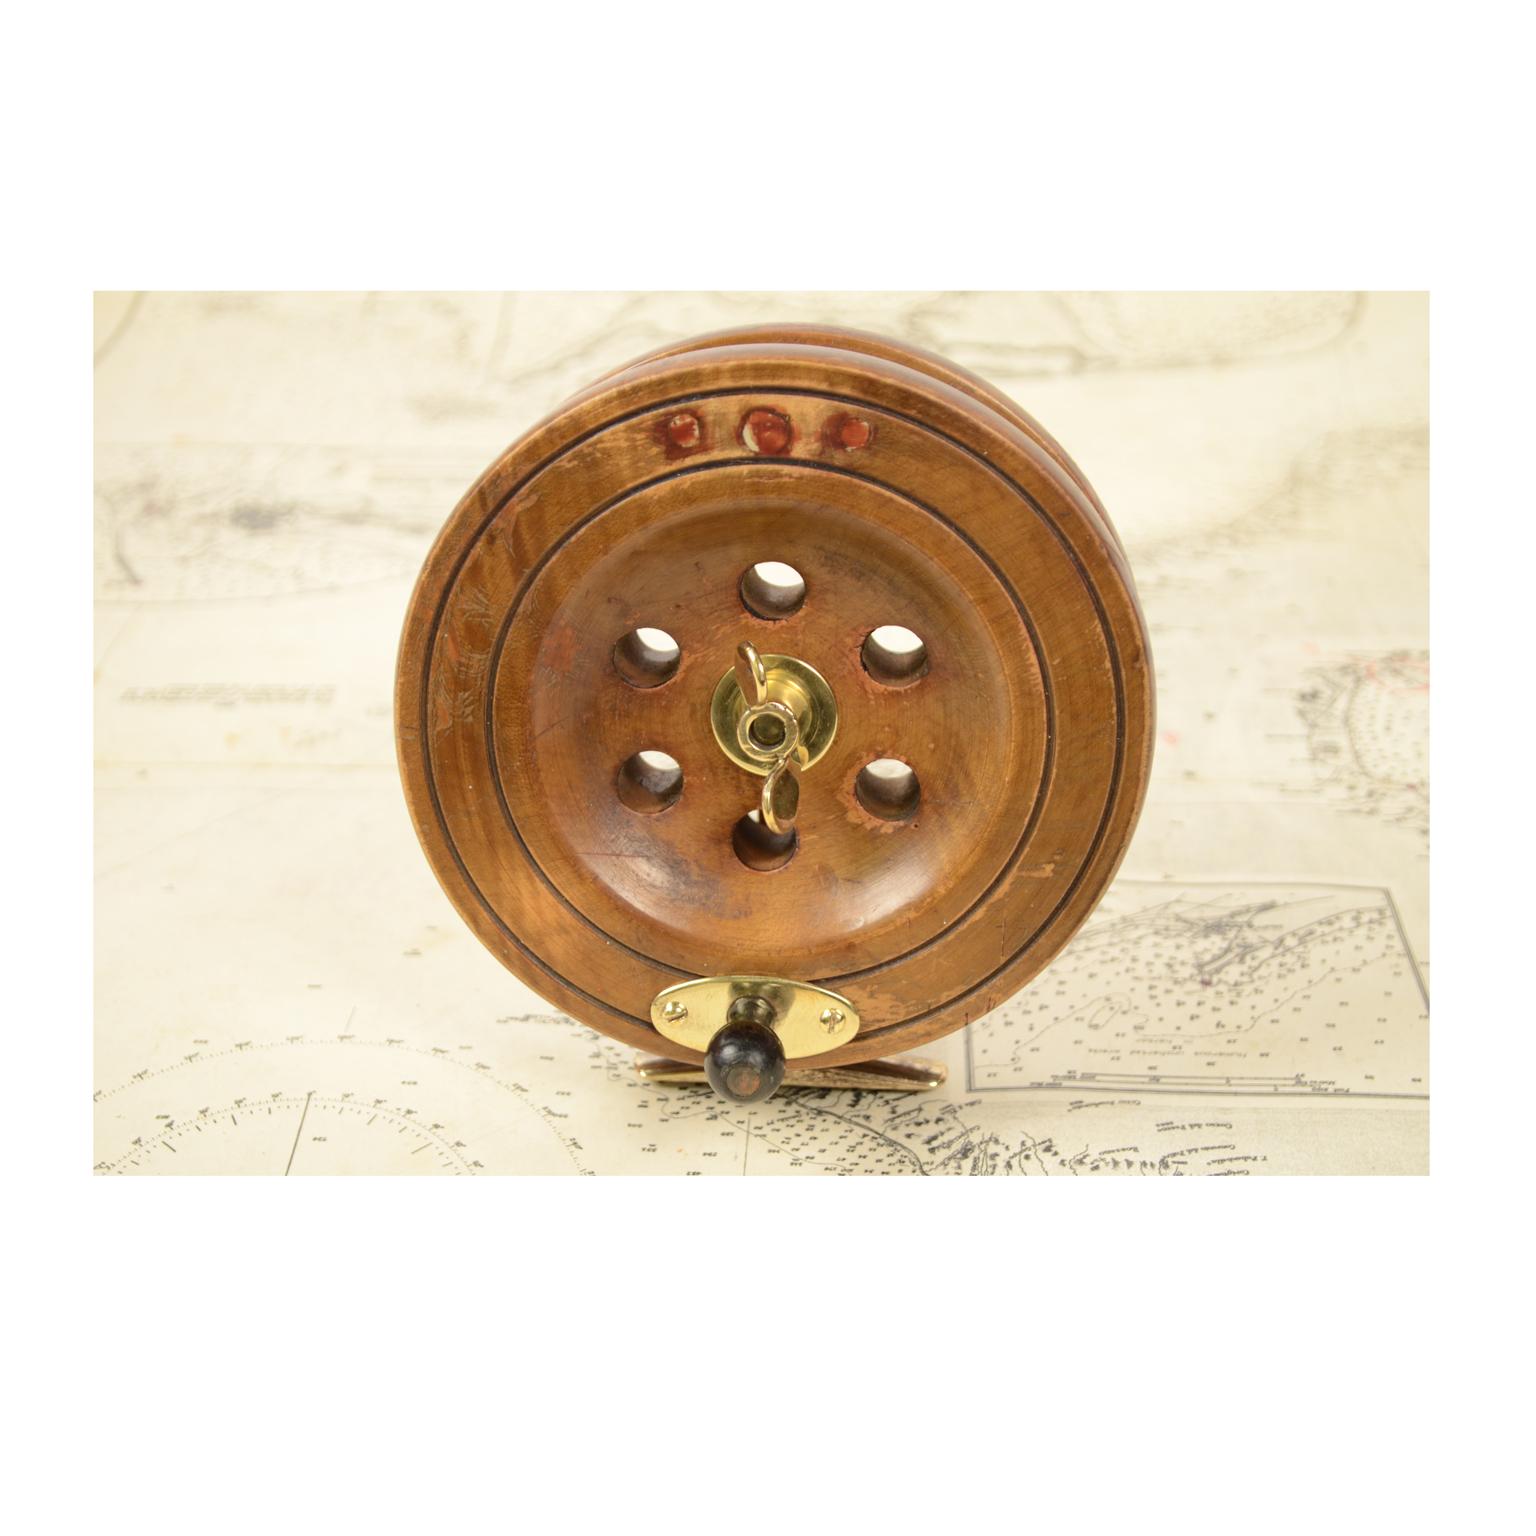 Fishing reel of turned oak and brass, English manufacture from the early 1900s. Measures: Cm 14 x 4.2.
  